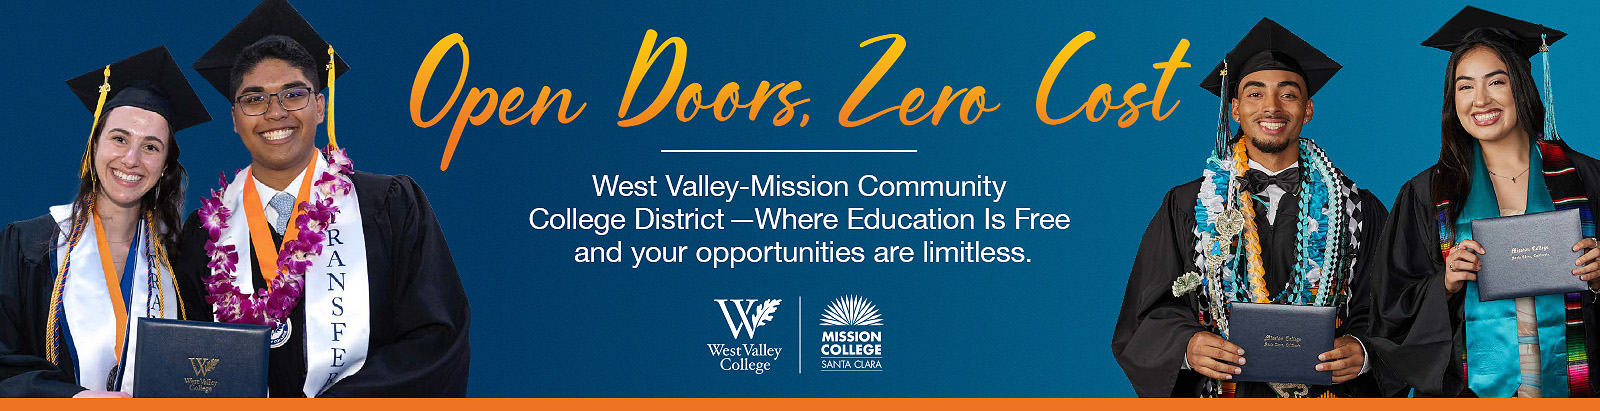 Open doors, open eduction. West Valley Mission Community College District 鈥� where education is free and the opportunities are limitless